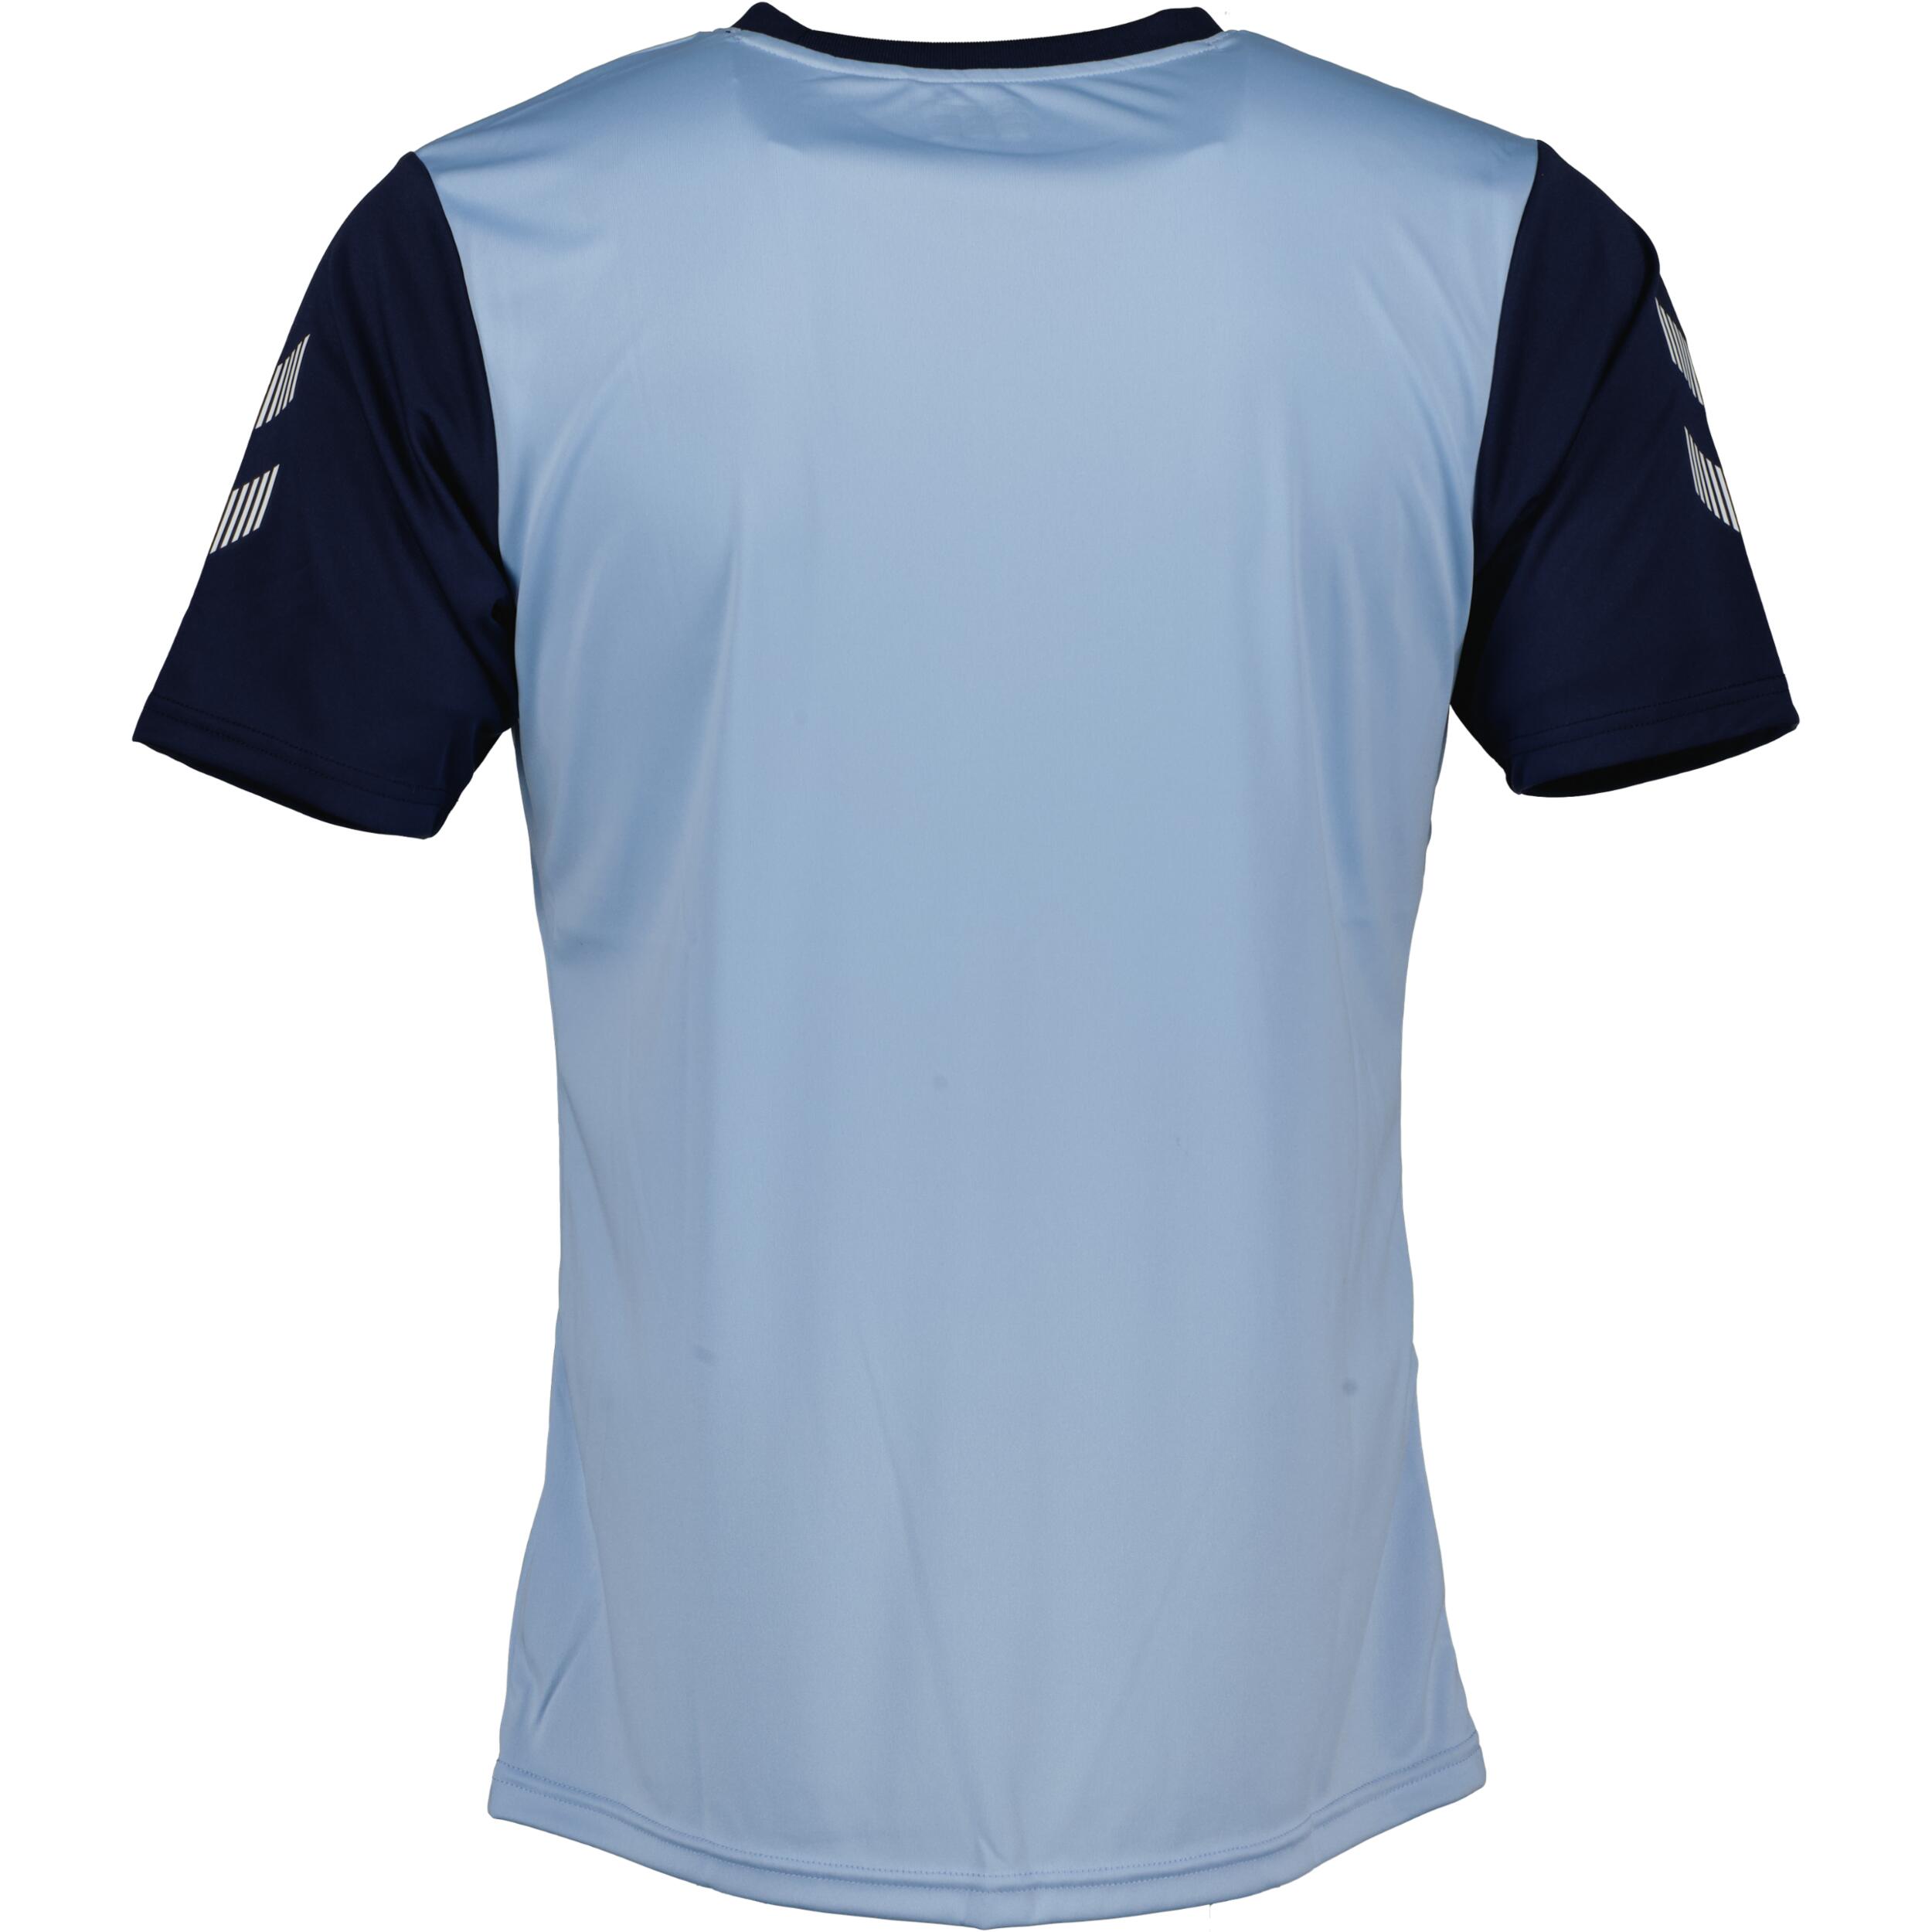 Match jersey for men, great for football, in argentina blue/navy 2/3